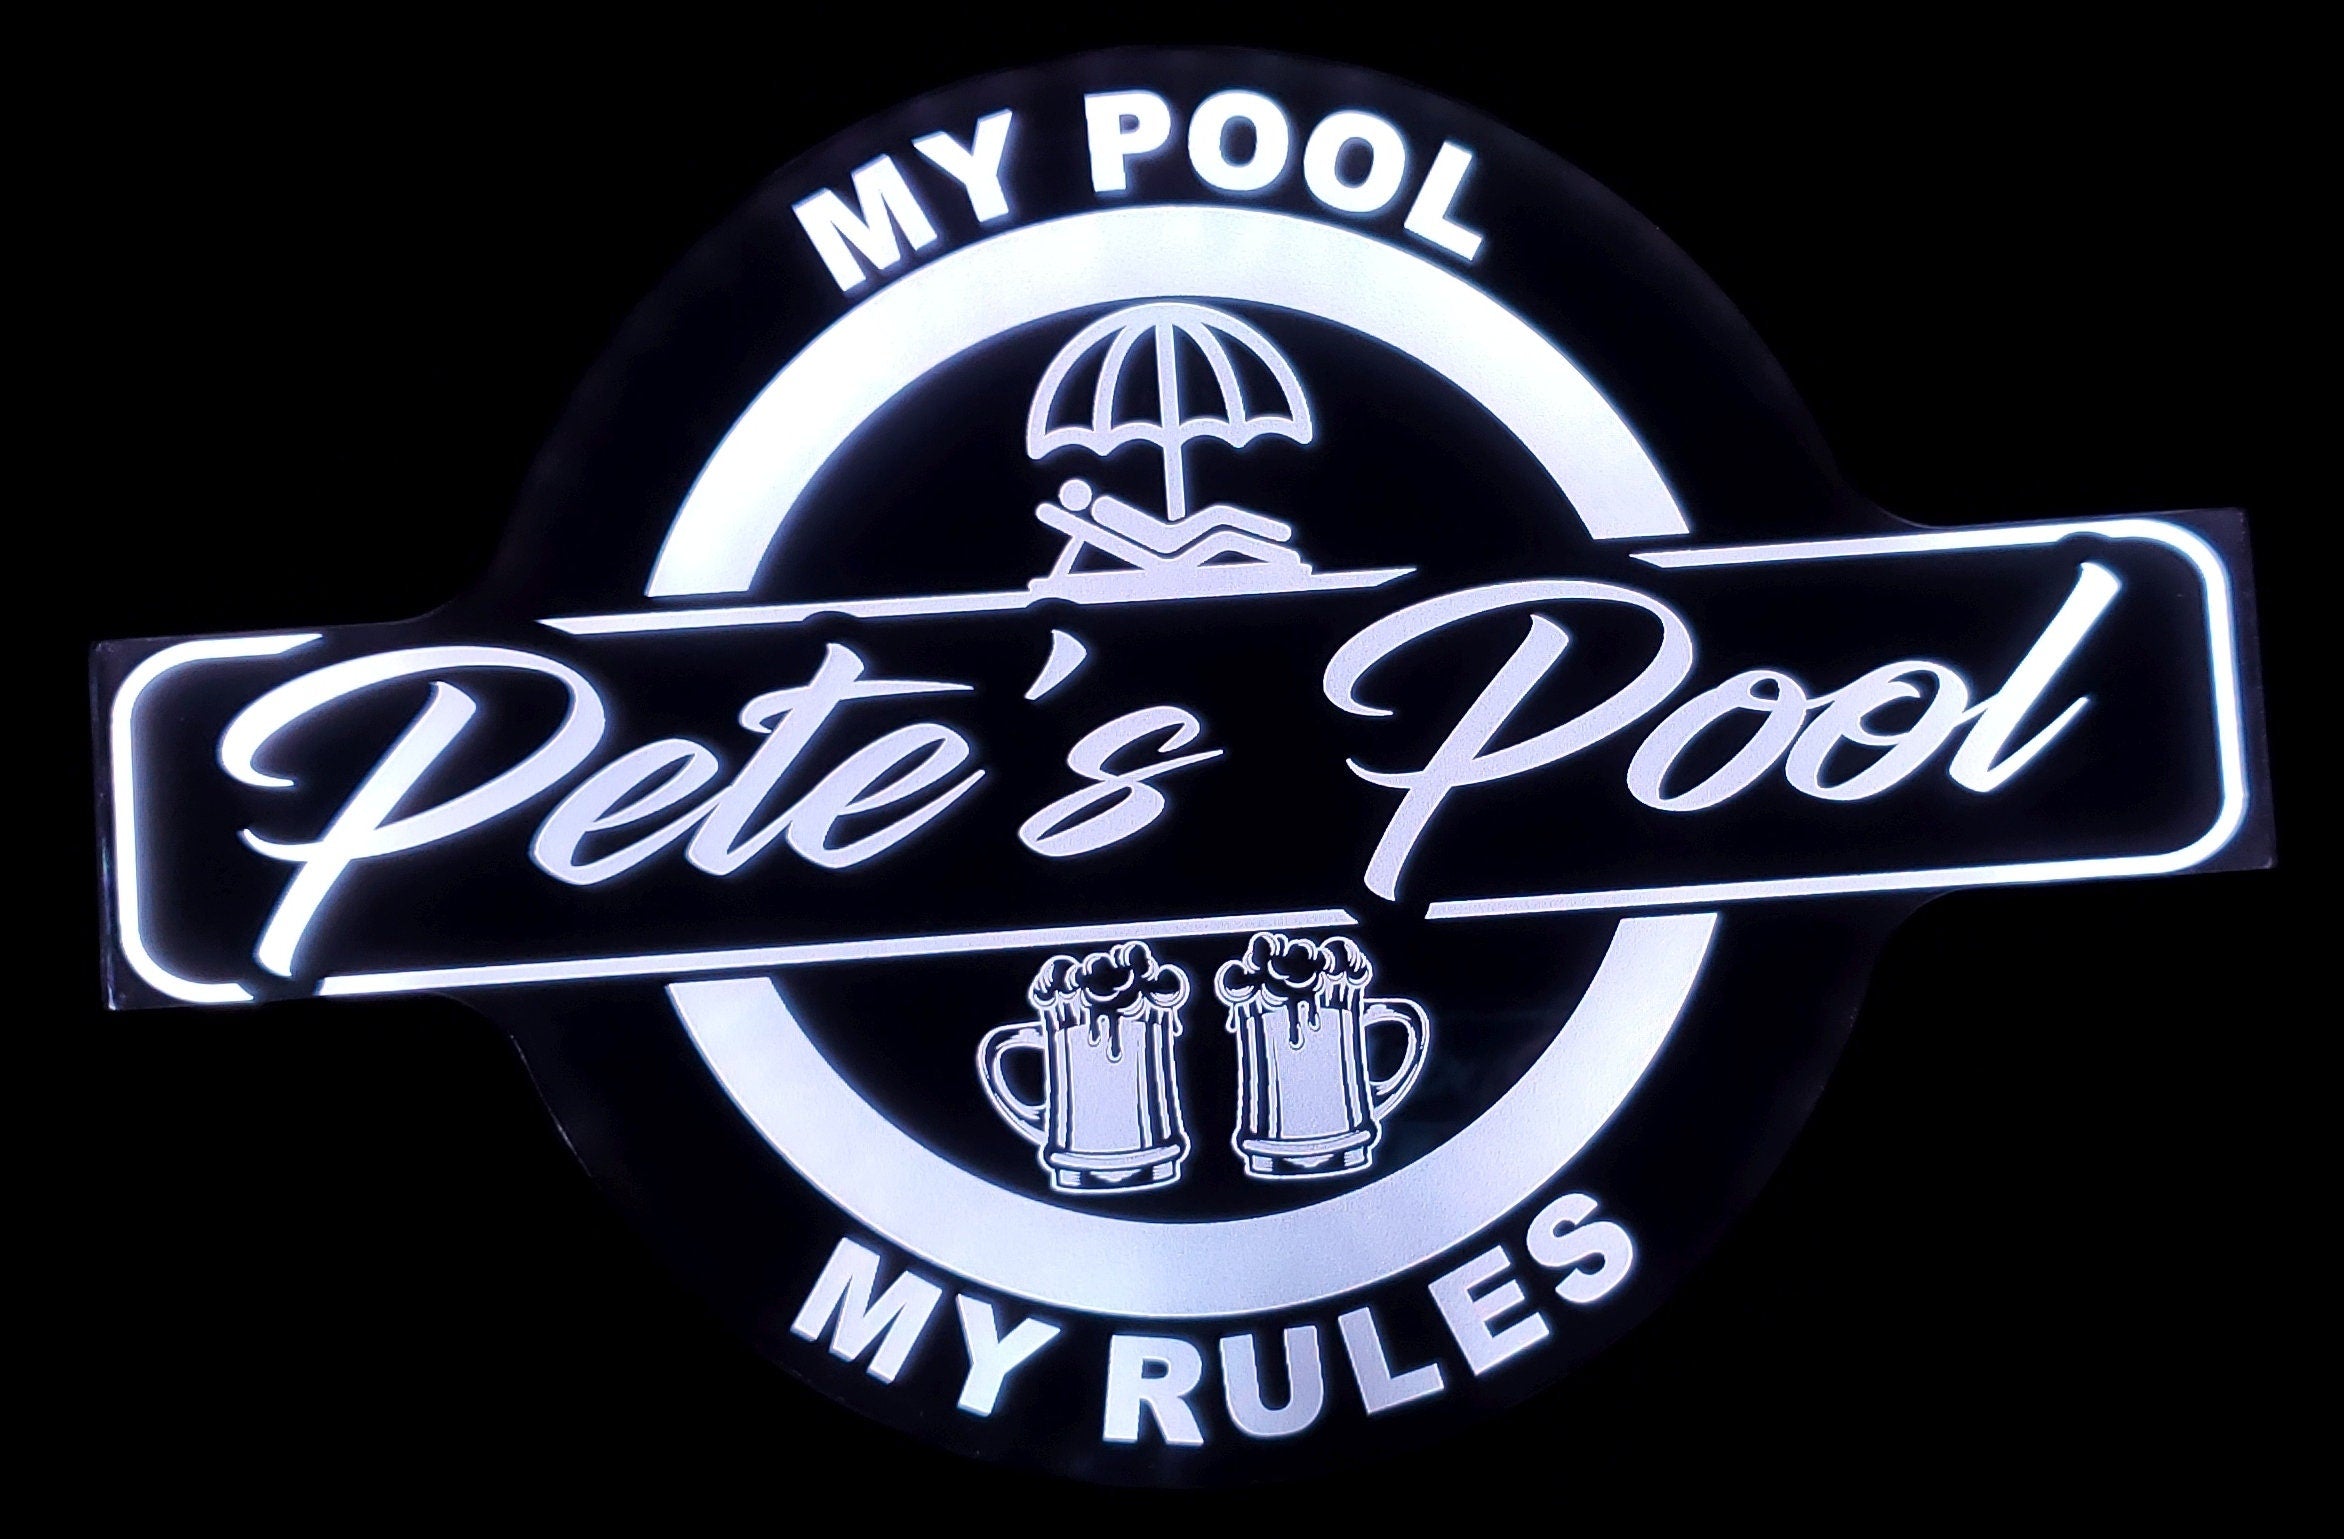 Custom Pool Sign, Barn, Garden, Shed, Gazebo or Shack Led Wall Sign Neon Like - Color Changing Remote Control - 4 Sizes Free Shipping